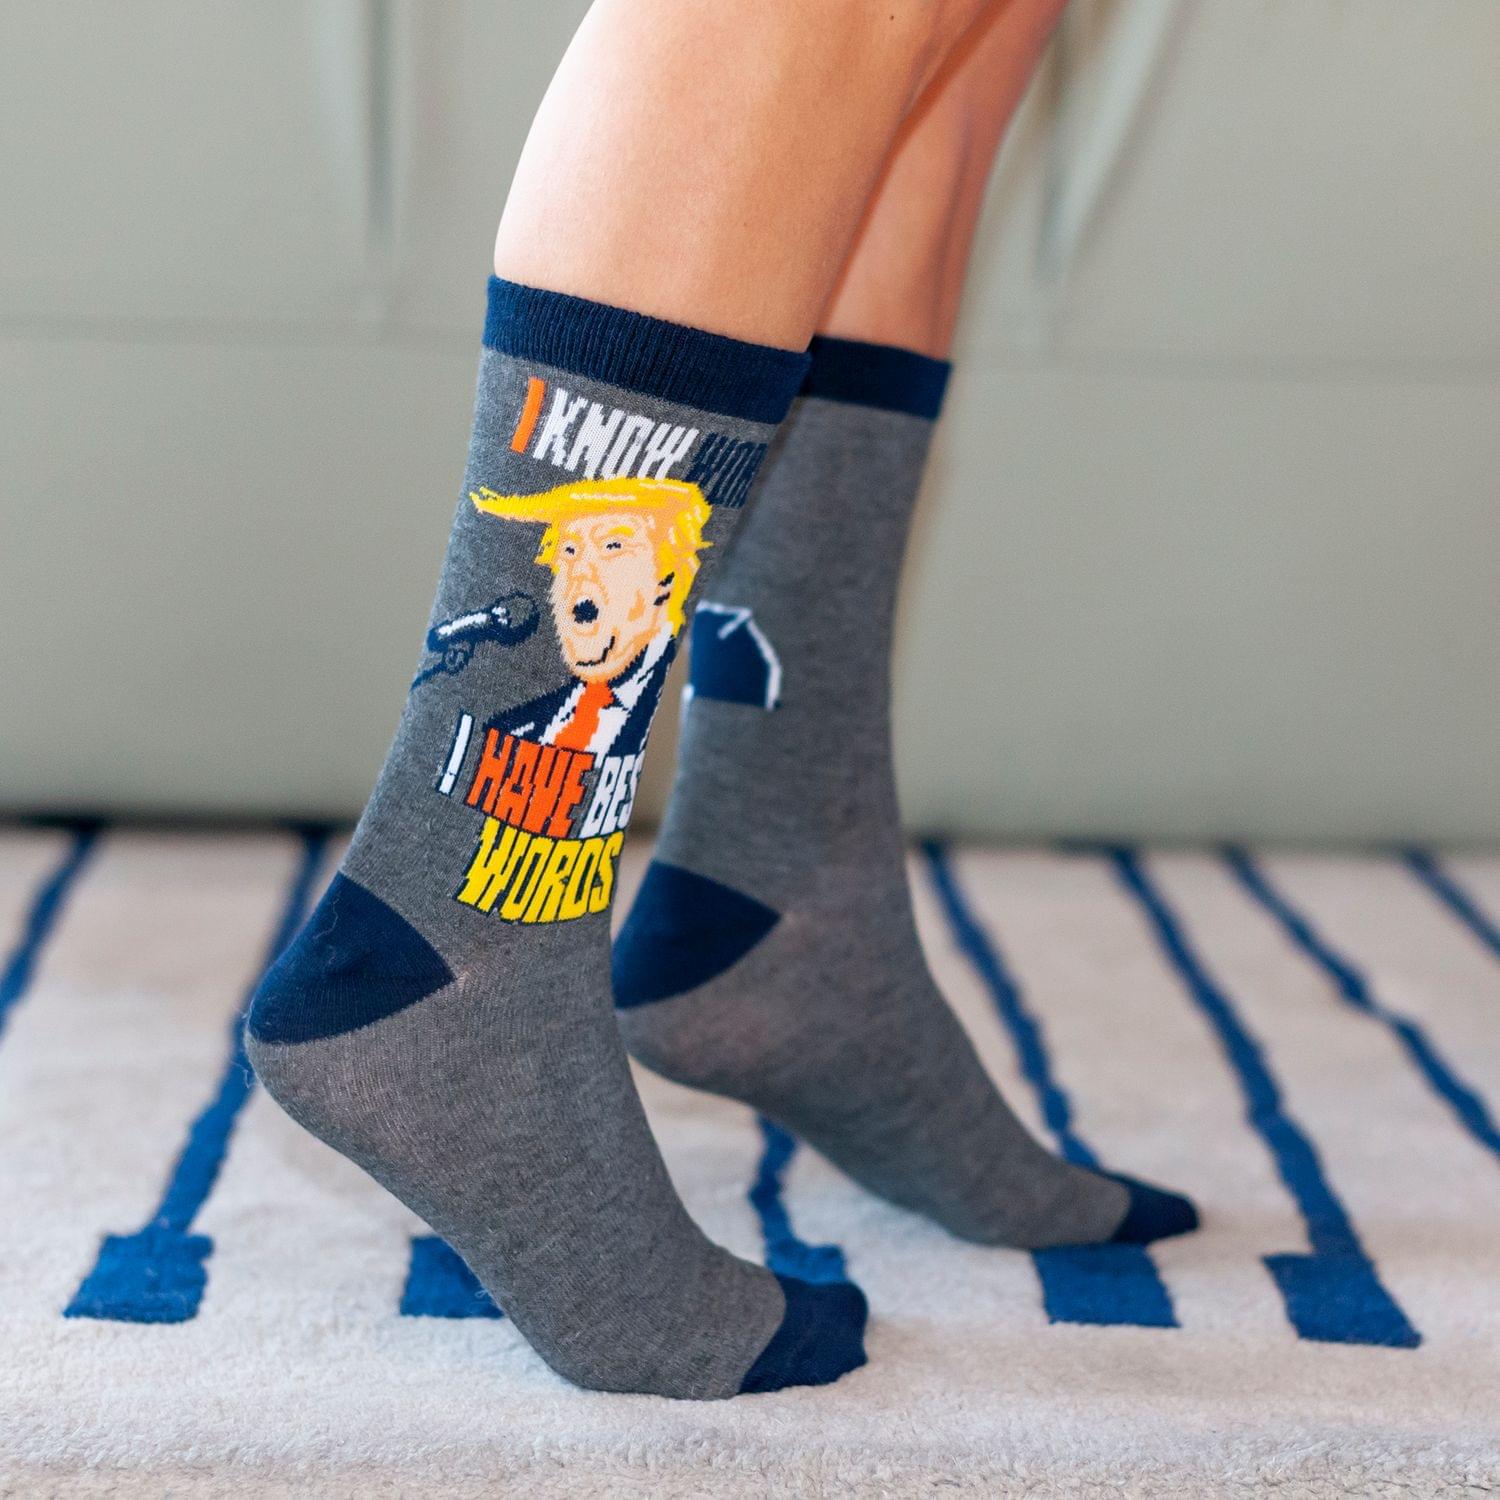 Donald Trump Socks | I Have Best Words And I Know Words Crew Sock Exclusive